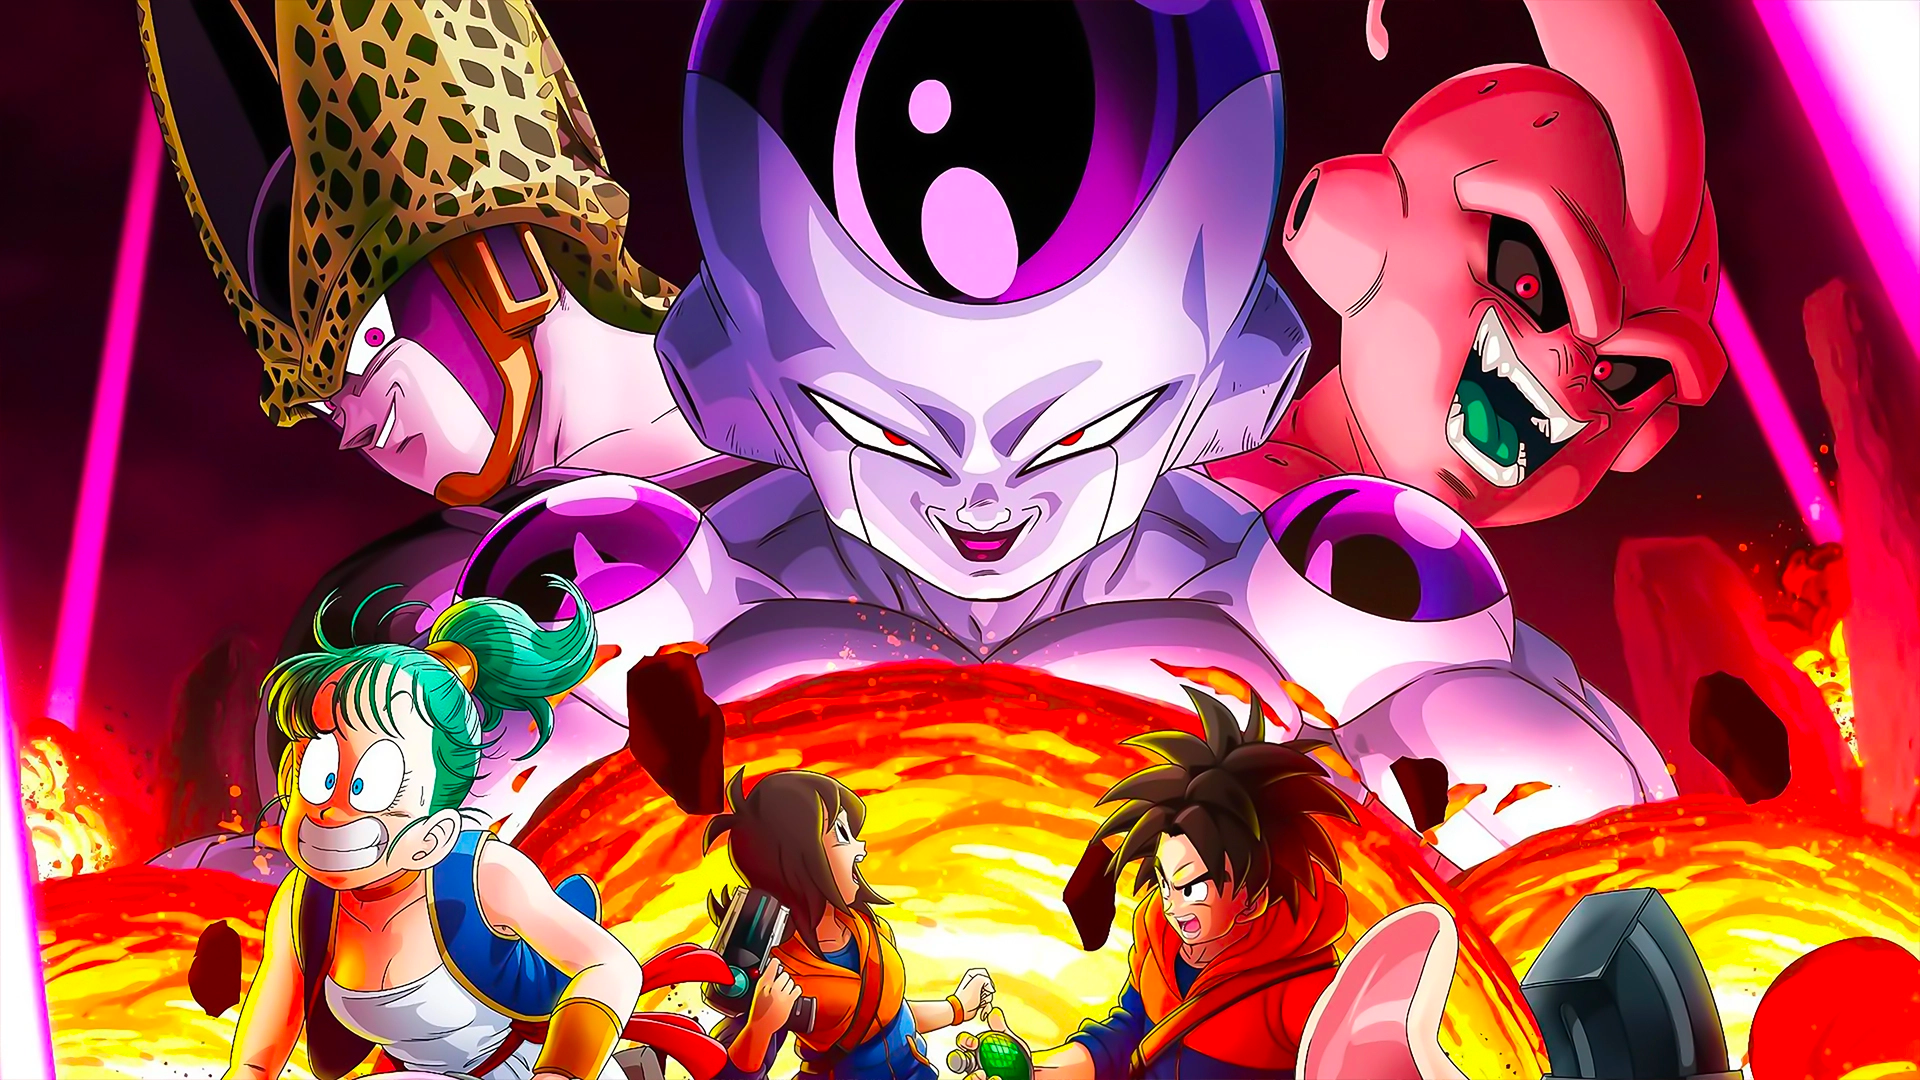 Challenge Trophée - Dragonball : The Breakers : « Amis inestimables »